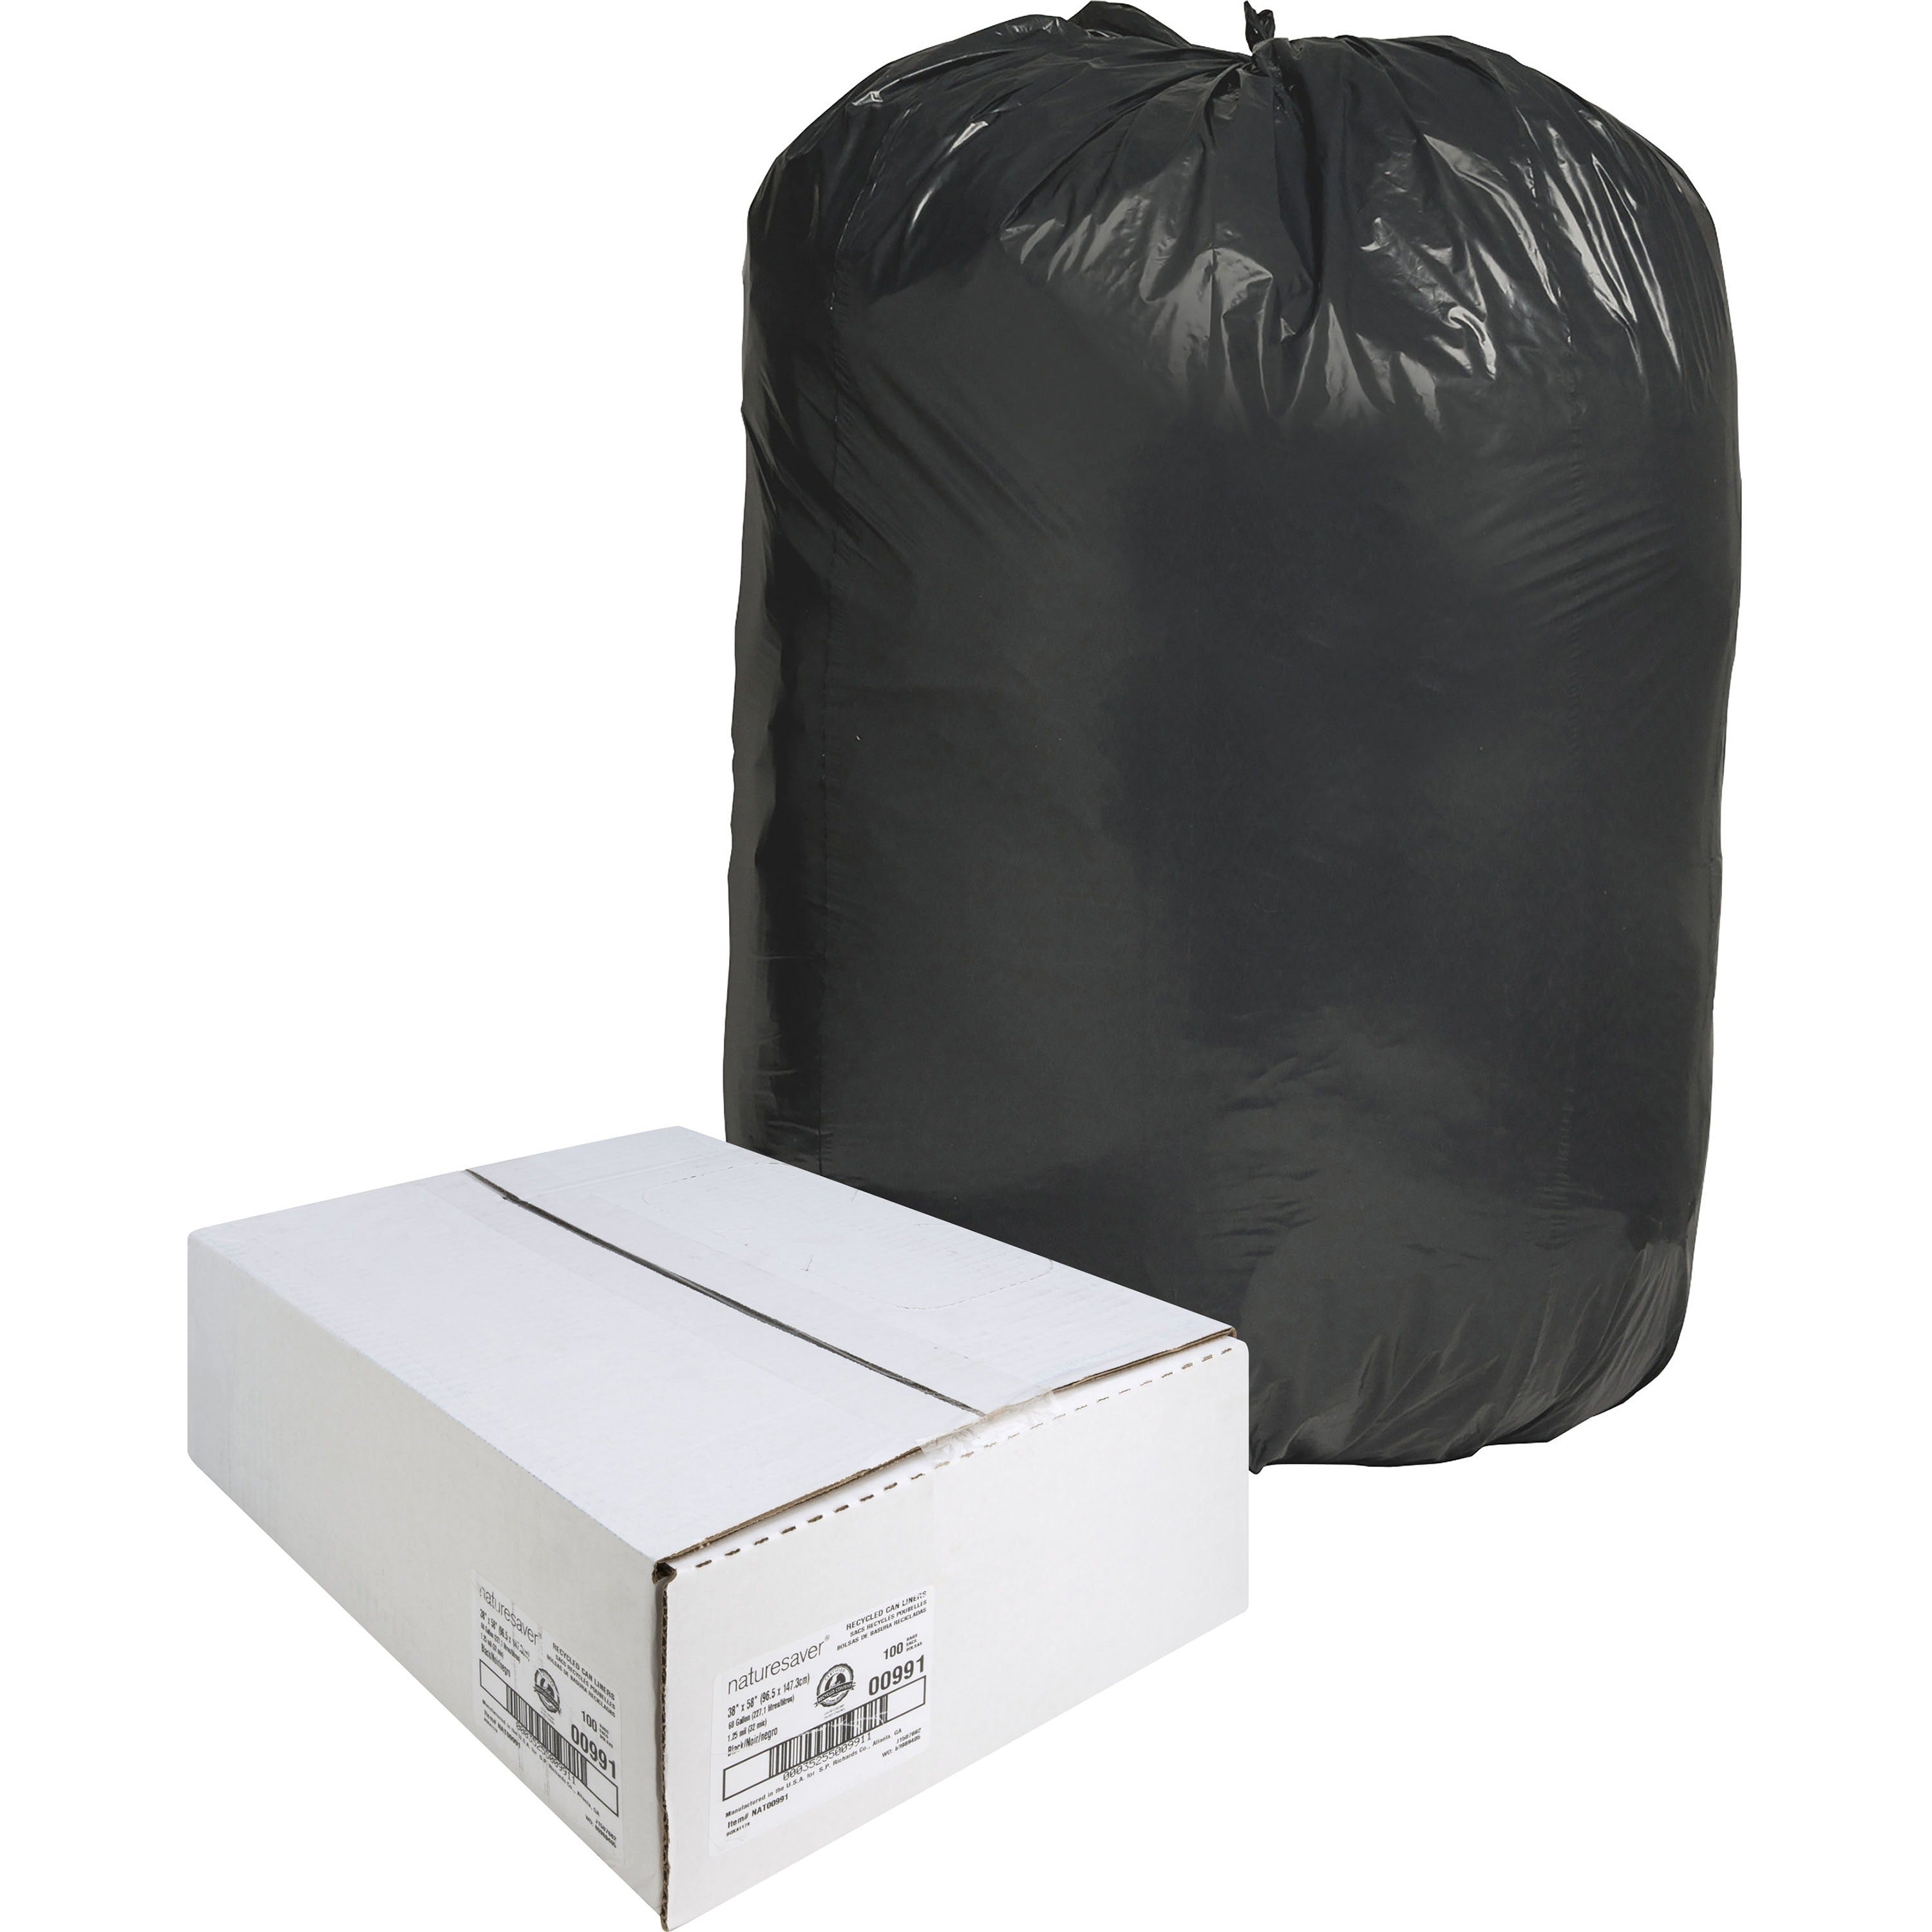 Nature Saver Black Low-density Recycled Can Liners - Extra Large Size - 60 gal Capacity - 38" Width x 58" Length - 1.25 mil (32 Micron) Thickness - Low Density - Black - Plastic - 100/Carton - Cleaning Supplies - Recycled - 